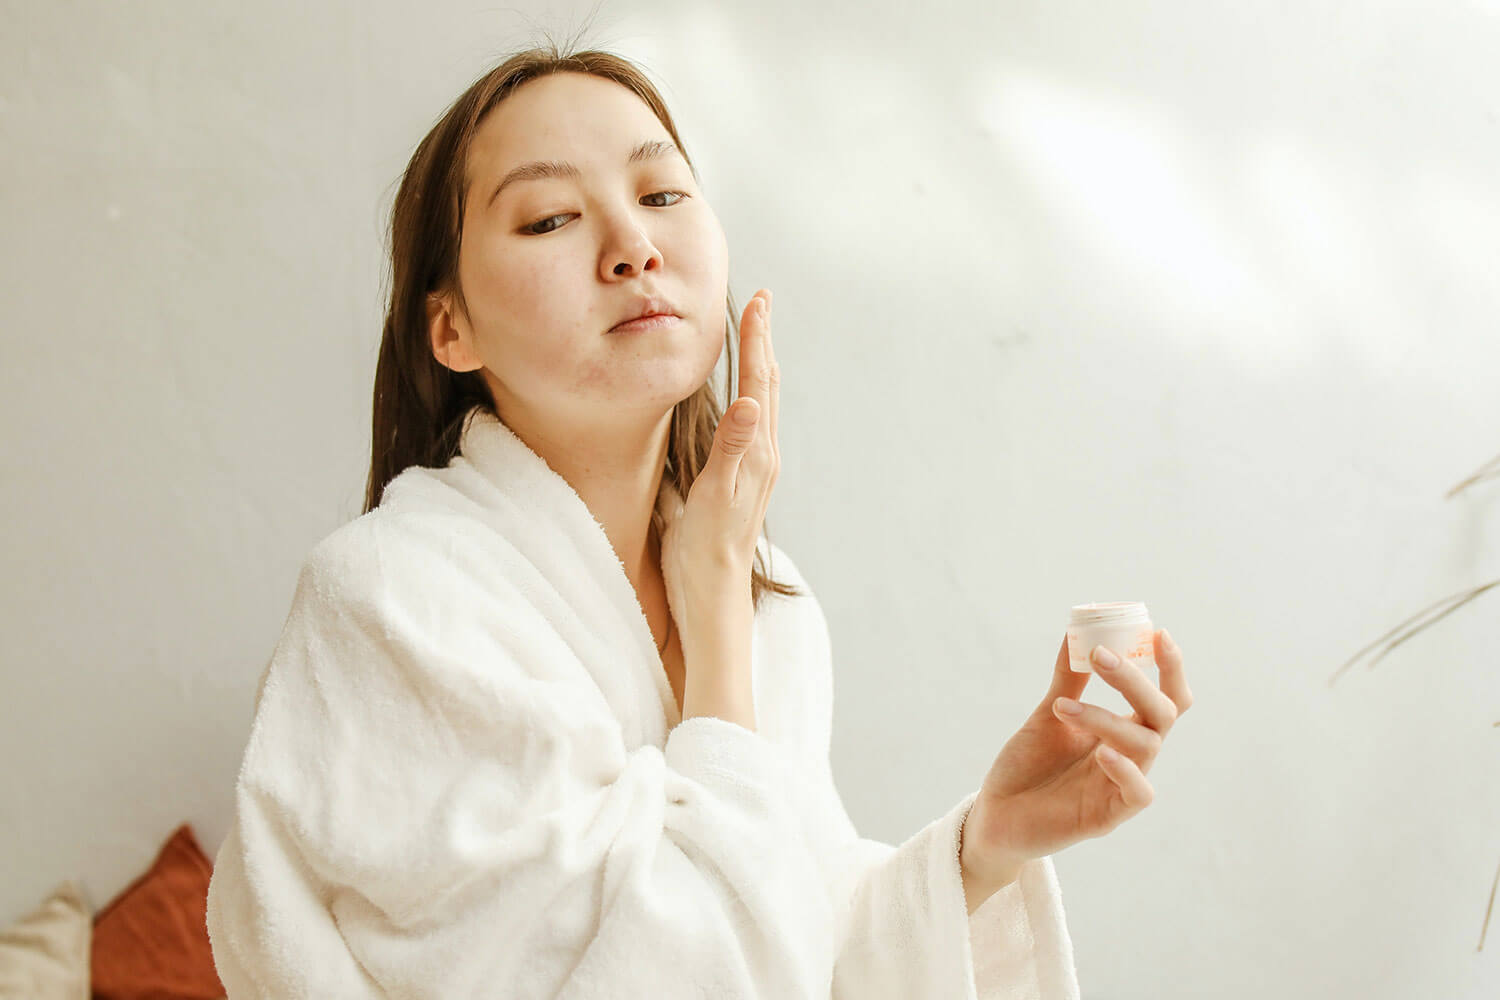 Building an Effective Acne Prone Skin Care Routine. Woman in White Bathrobe Putting on Skin Care Product on Her Face.